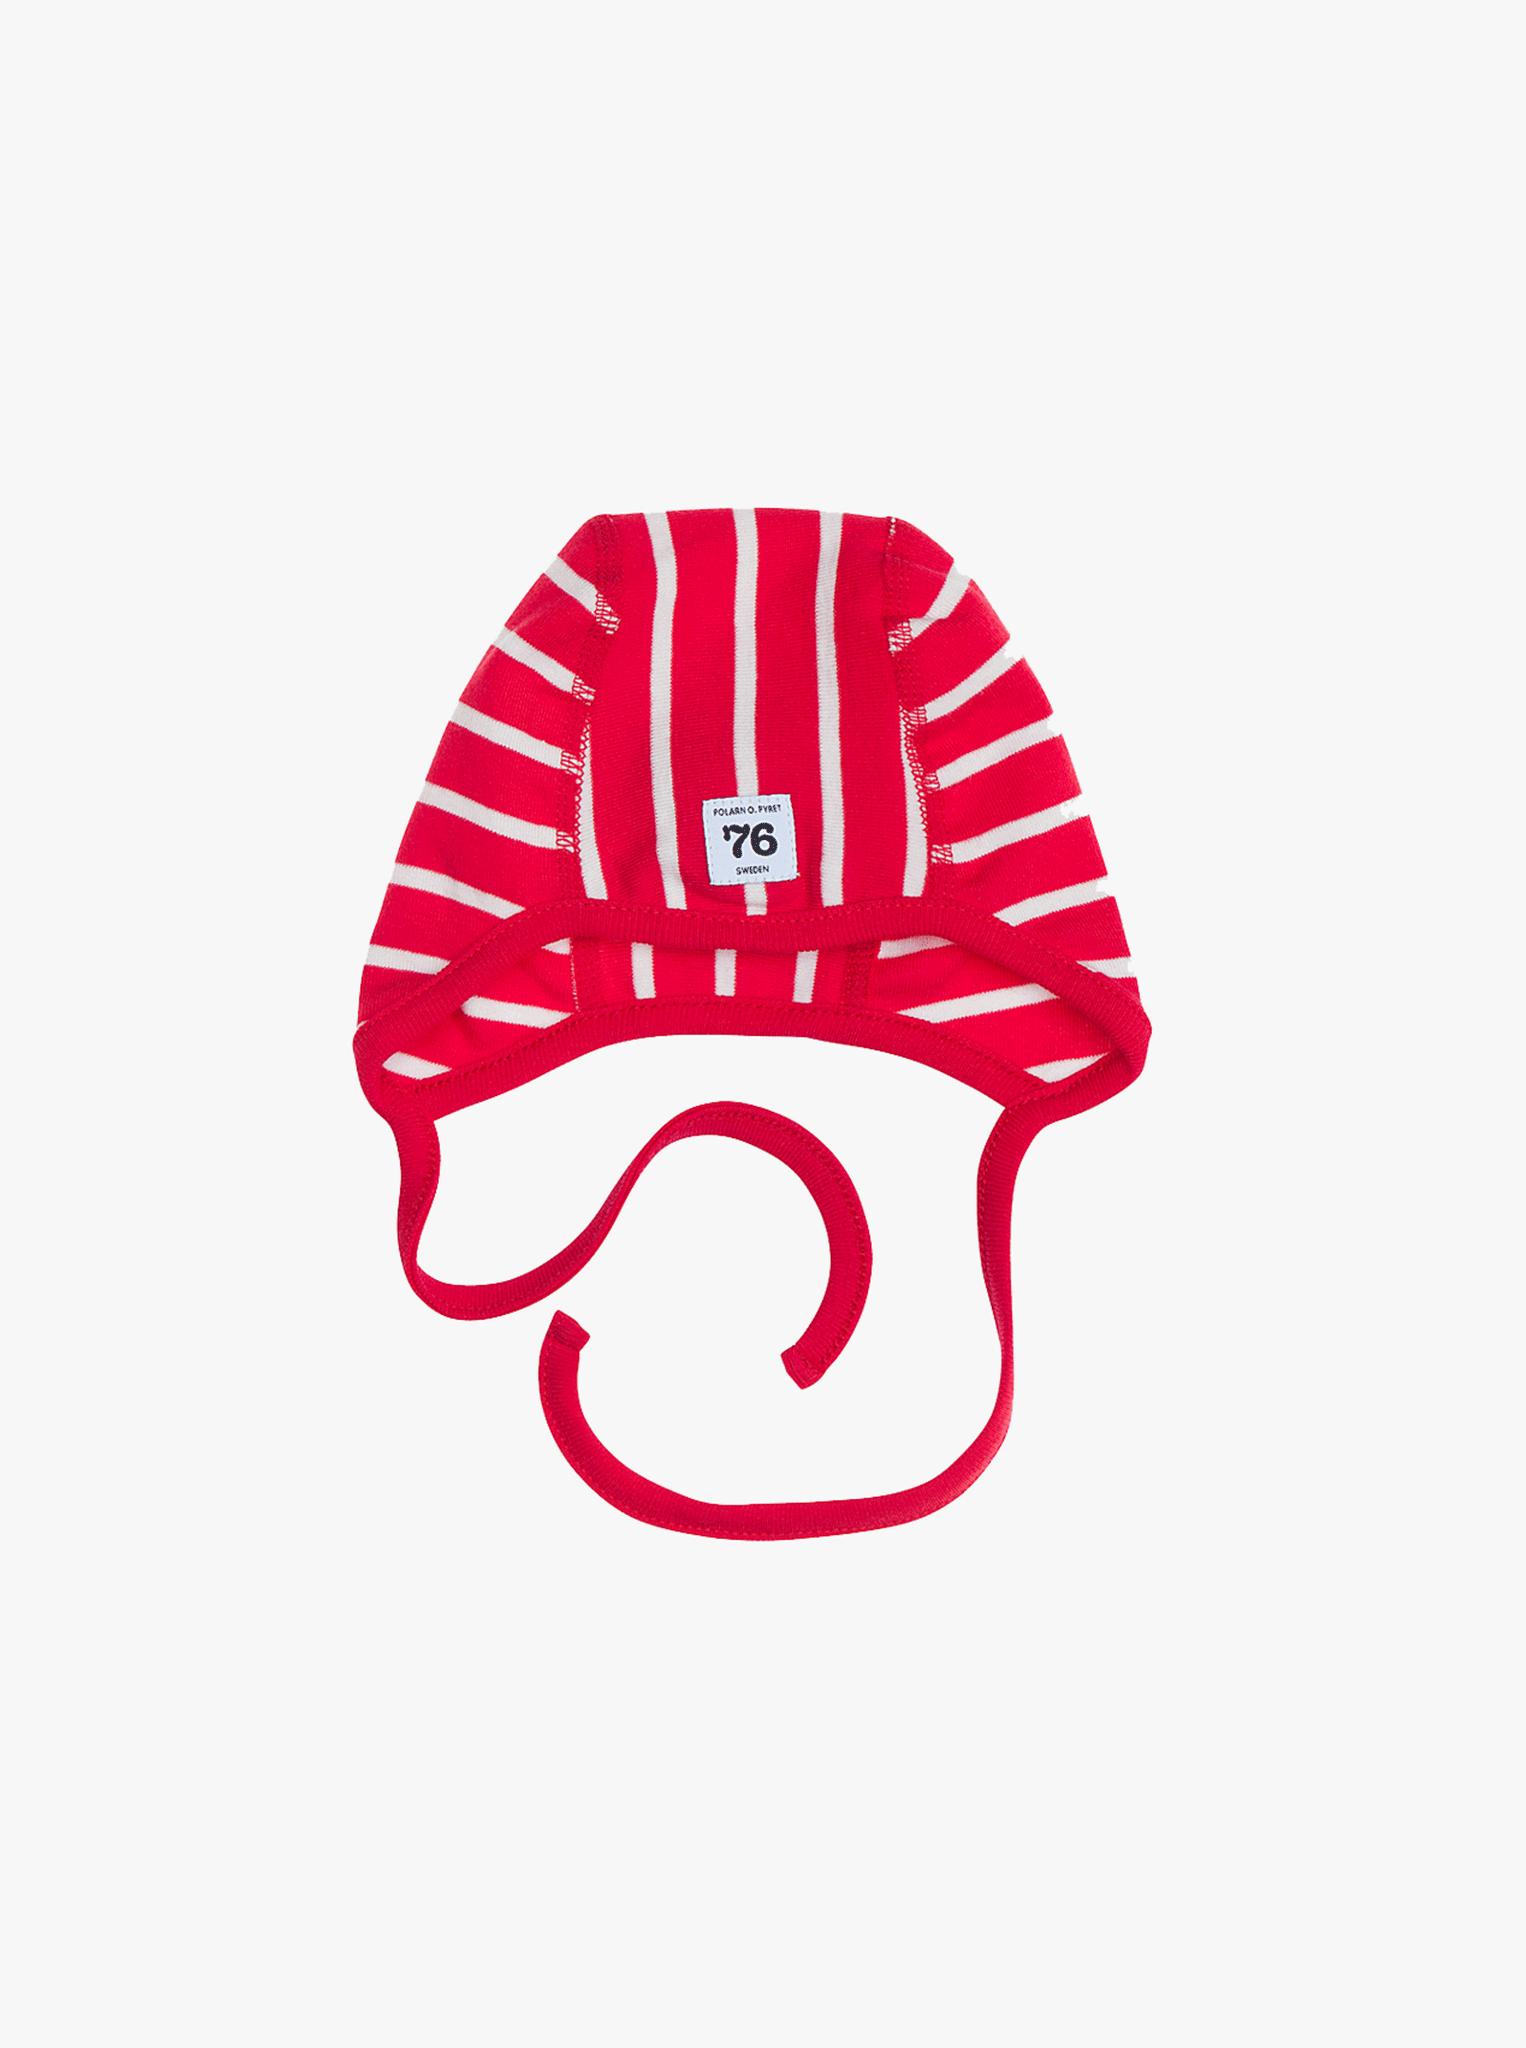 PO.P classic red and white Stripe helmet baby Hat for Preterm-9m